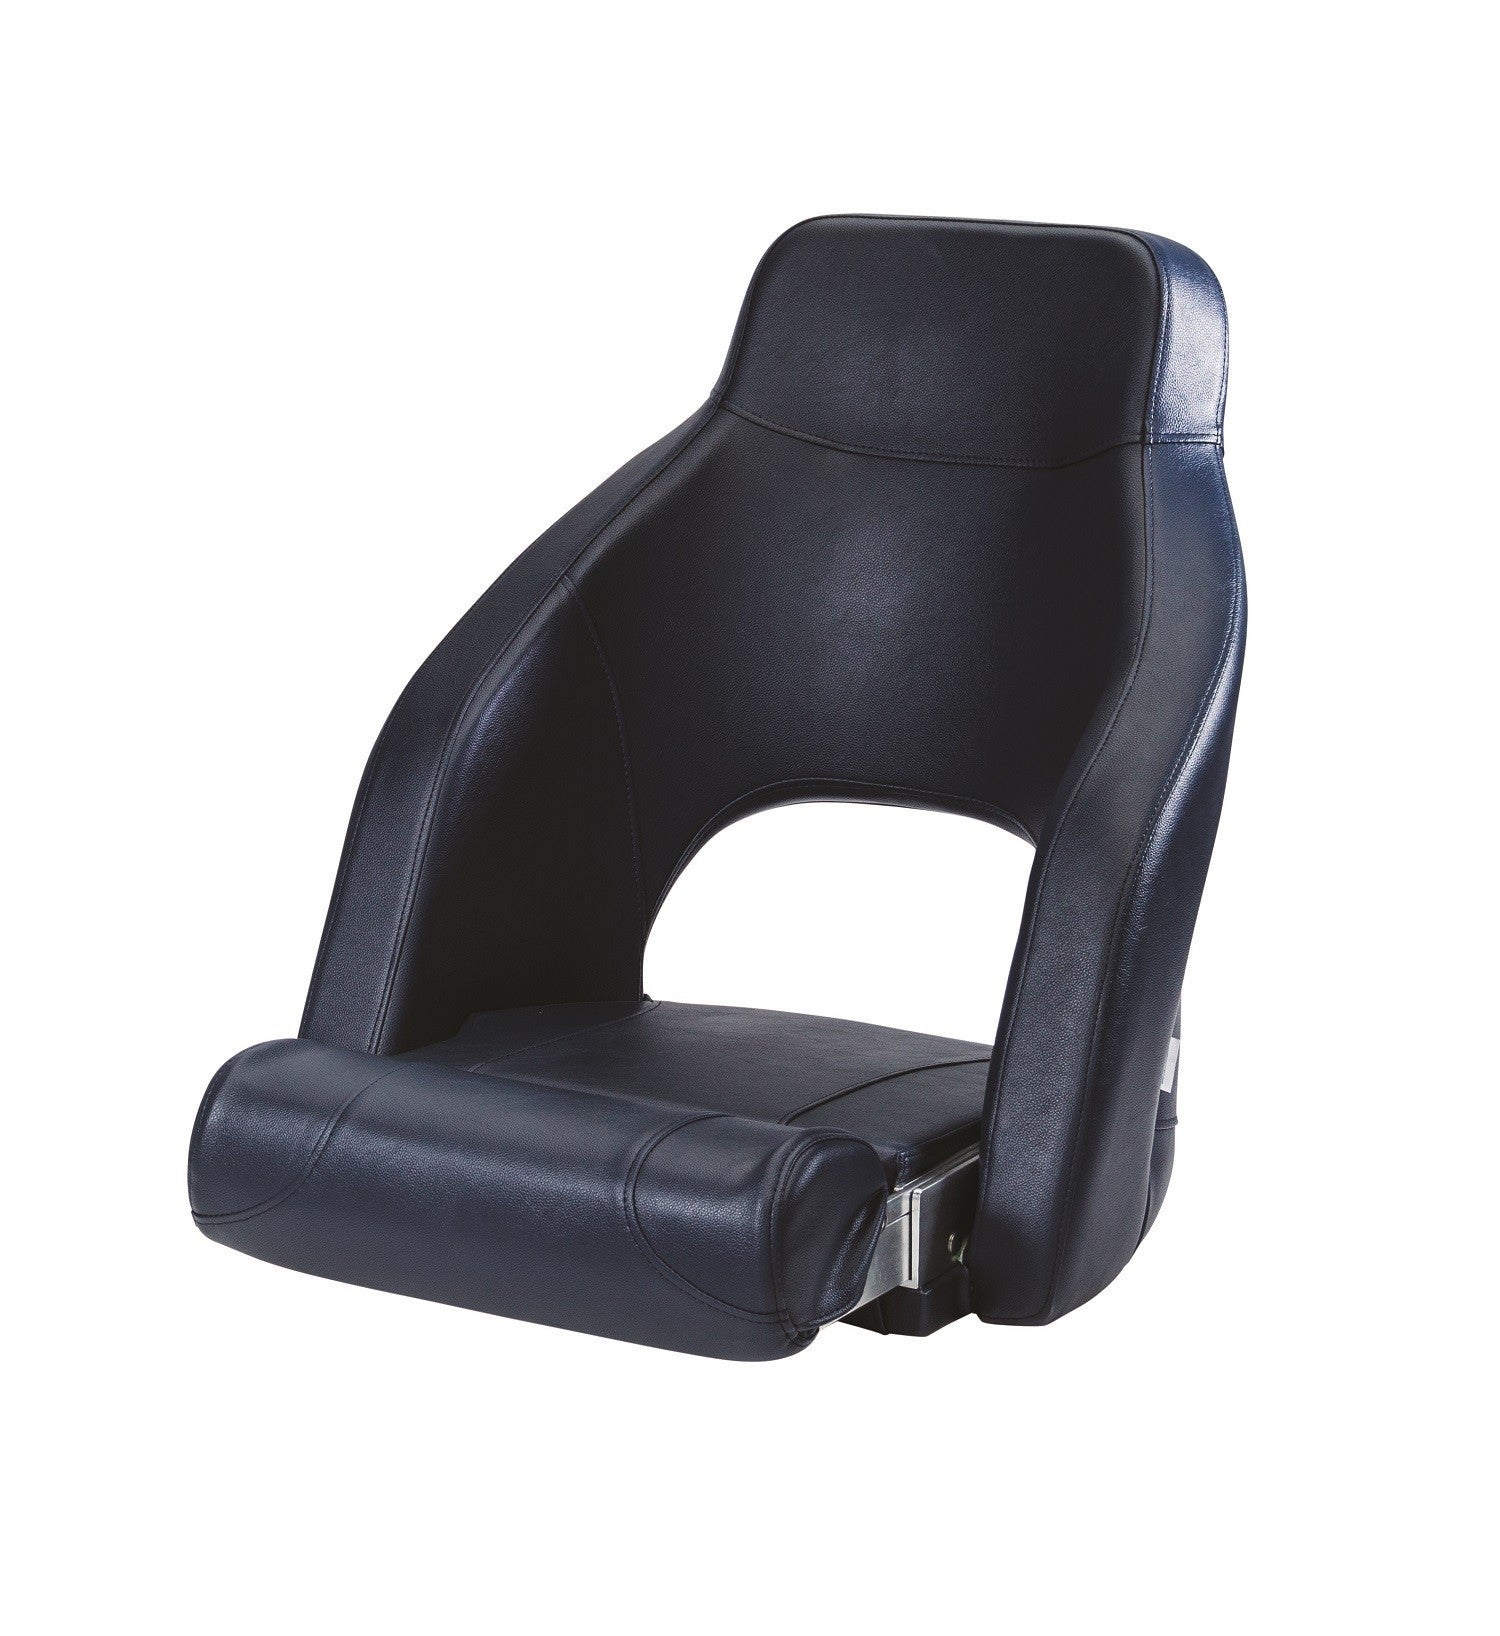 ADMIRAL Sports helm seat with lateral supports and flip up squab - Blue